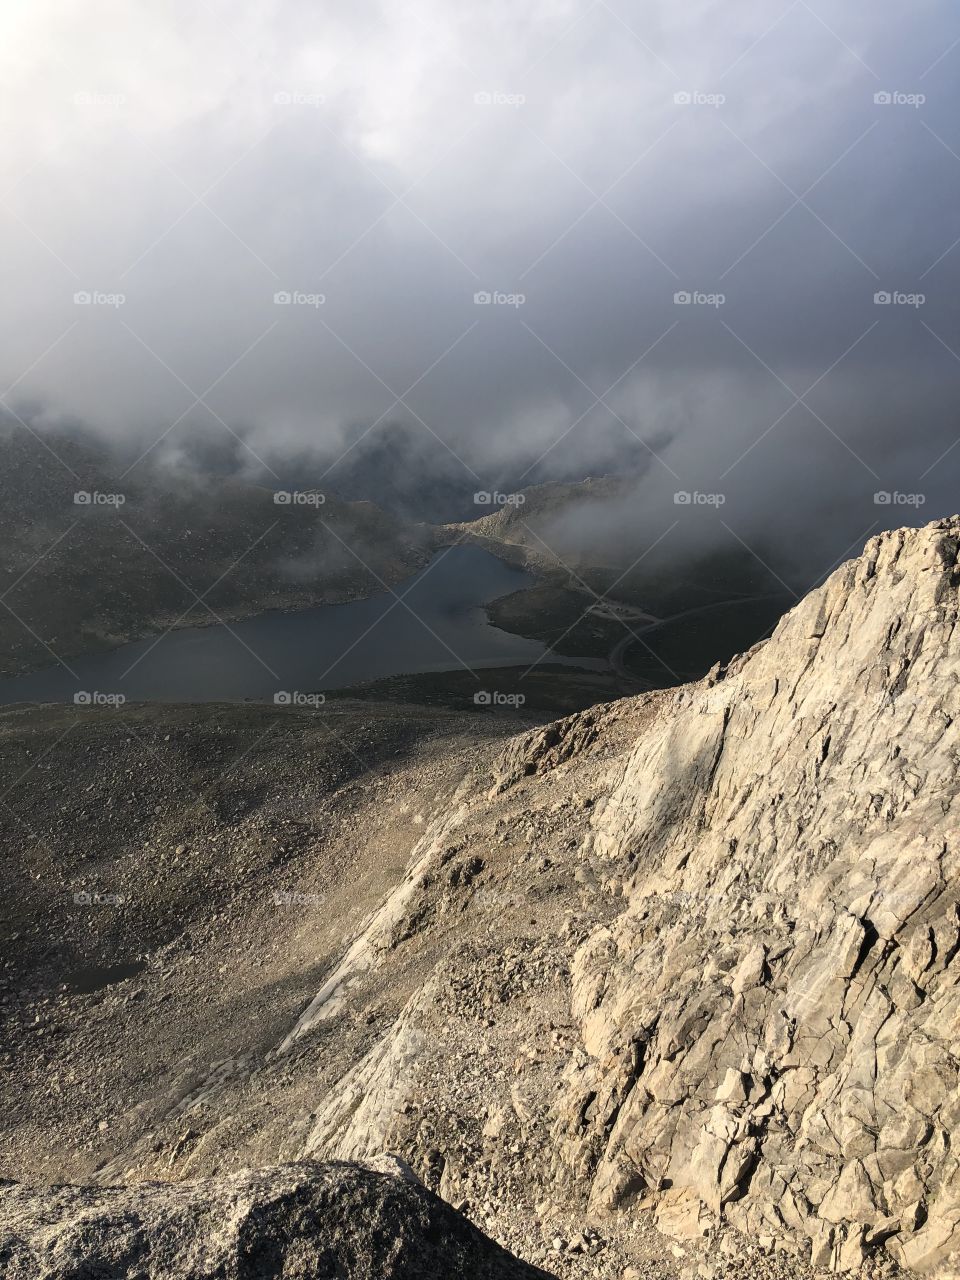 The clouds moved in, so I hiked up into the clouds to get a pic of the lake from above. 